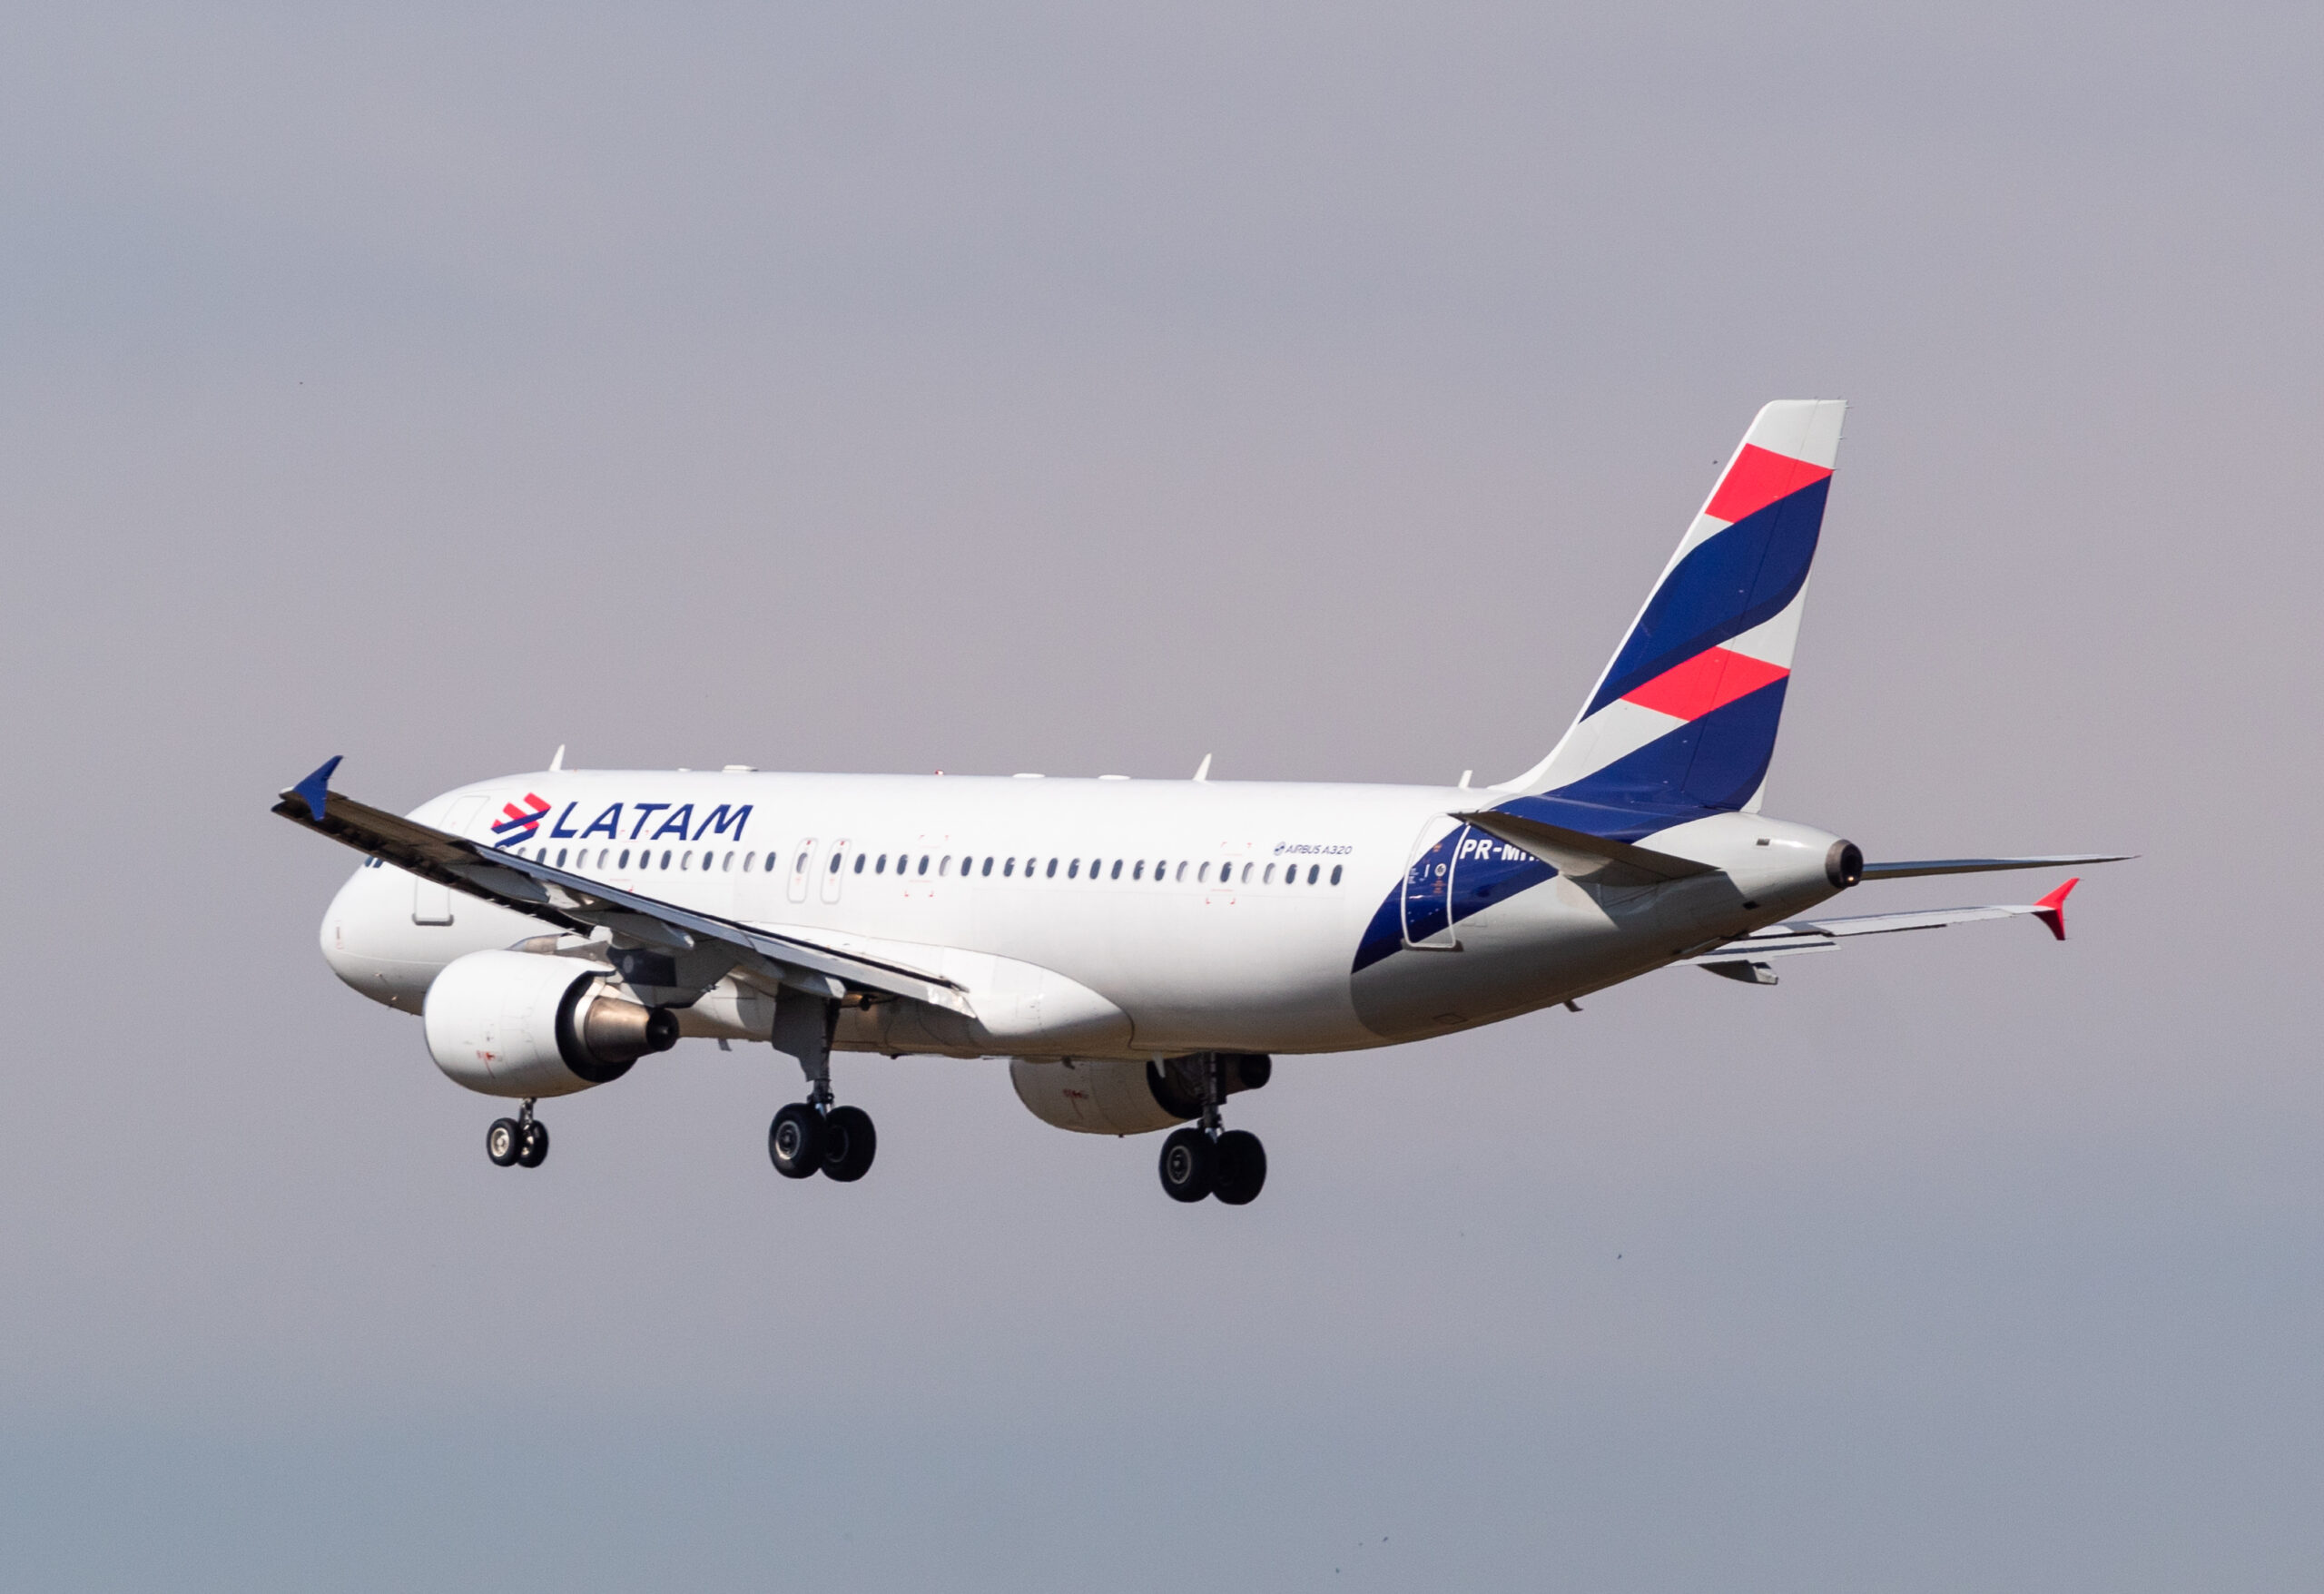 PR-MHM - Airbus A320-214 - LATAM Airlines - Blog do Spotter